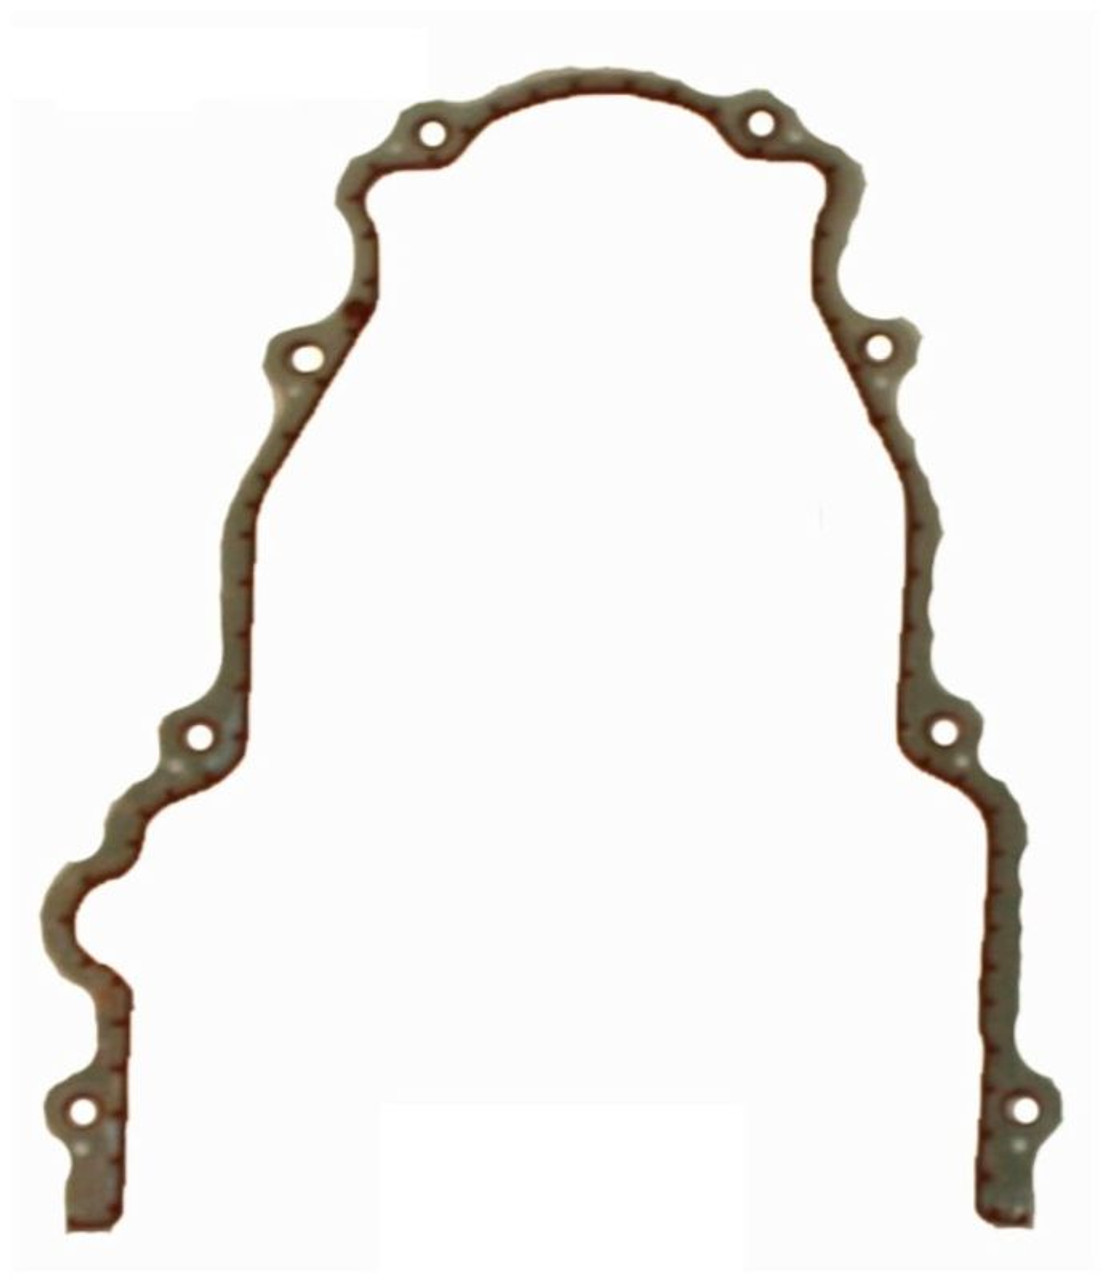 2015 Chevrolet Express 2500 6.0L Engine Timing Cover Gasket TCG293-A -904